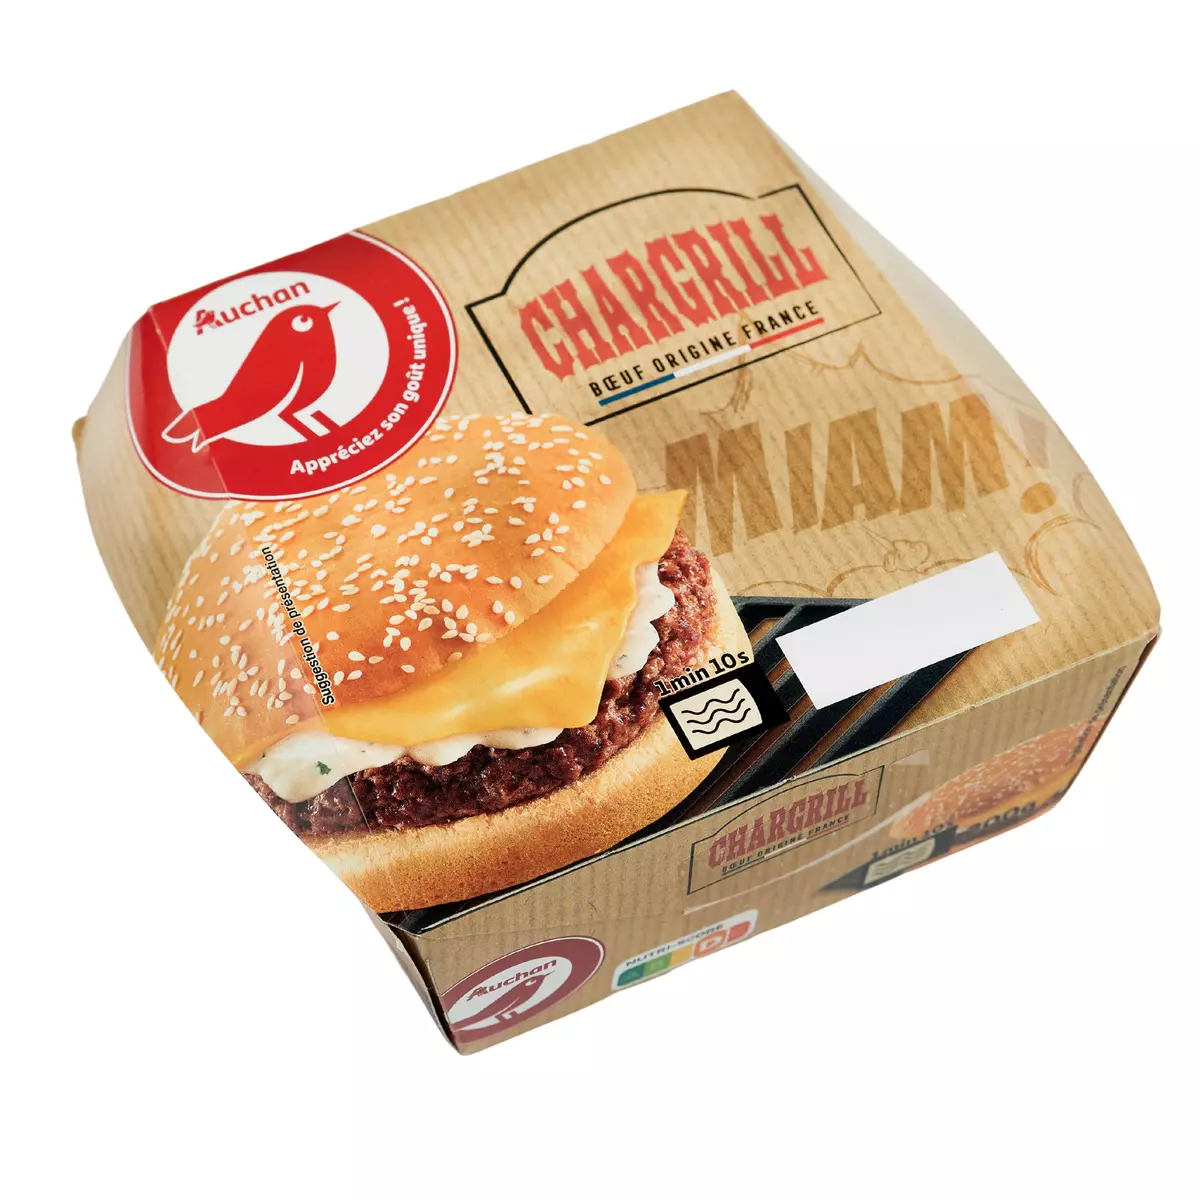 AUCHAN Pause chargrill burger  200g